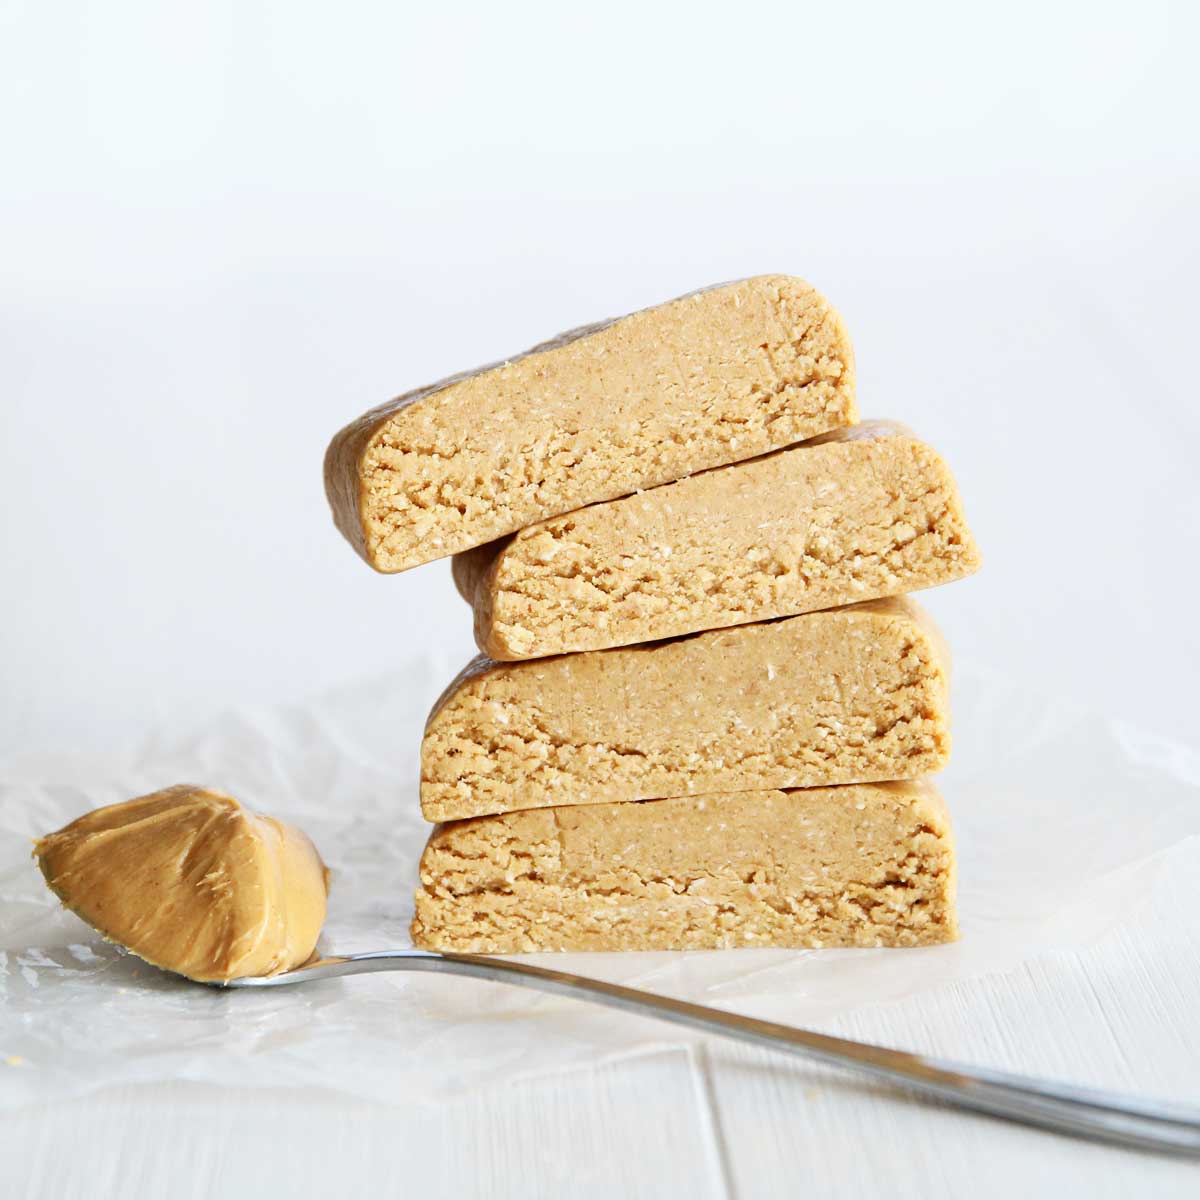 4-Ingredient Peanut Butter Oatmeal Protein Bars (Healthy, GF and Vegan) - Peanut Butter Oatmeal Protein Bars